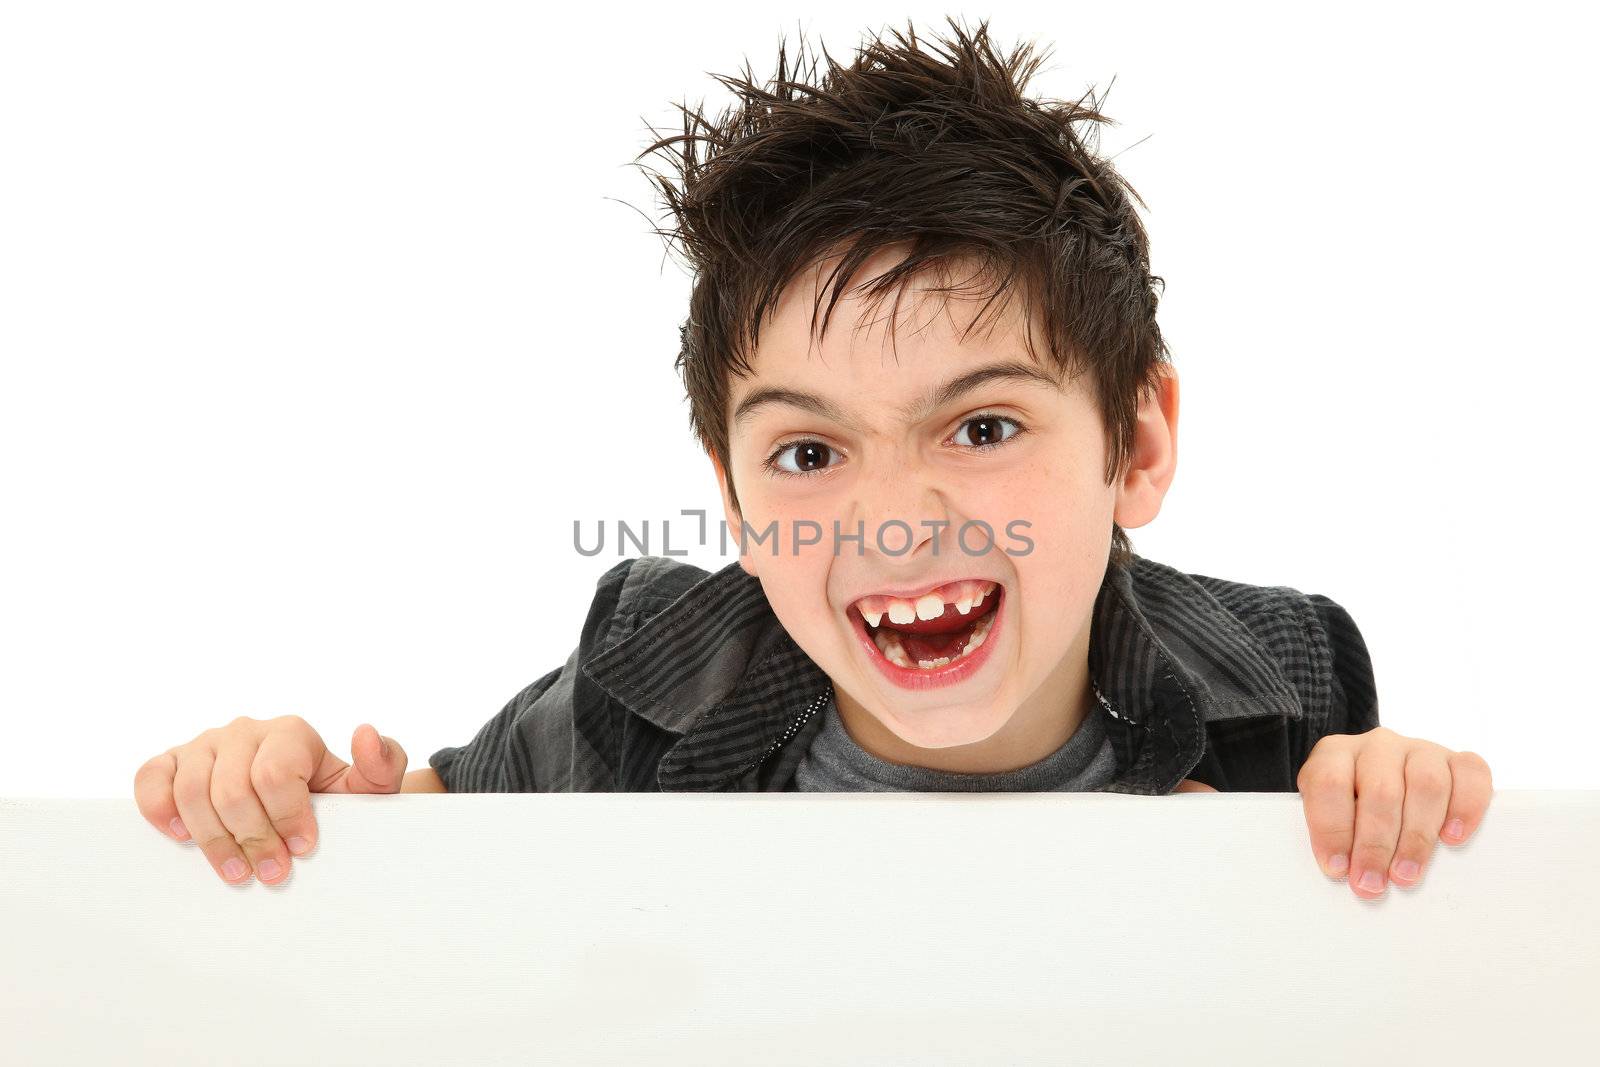 Adorable and funny 8 year old boy making silly animal face while holding blank canvas over white.